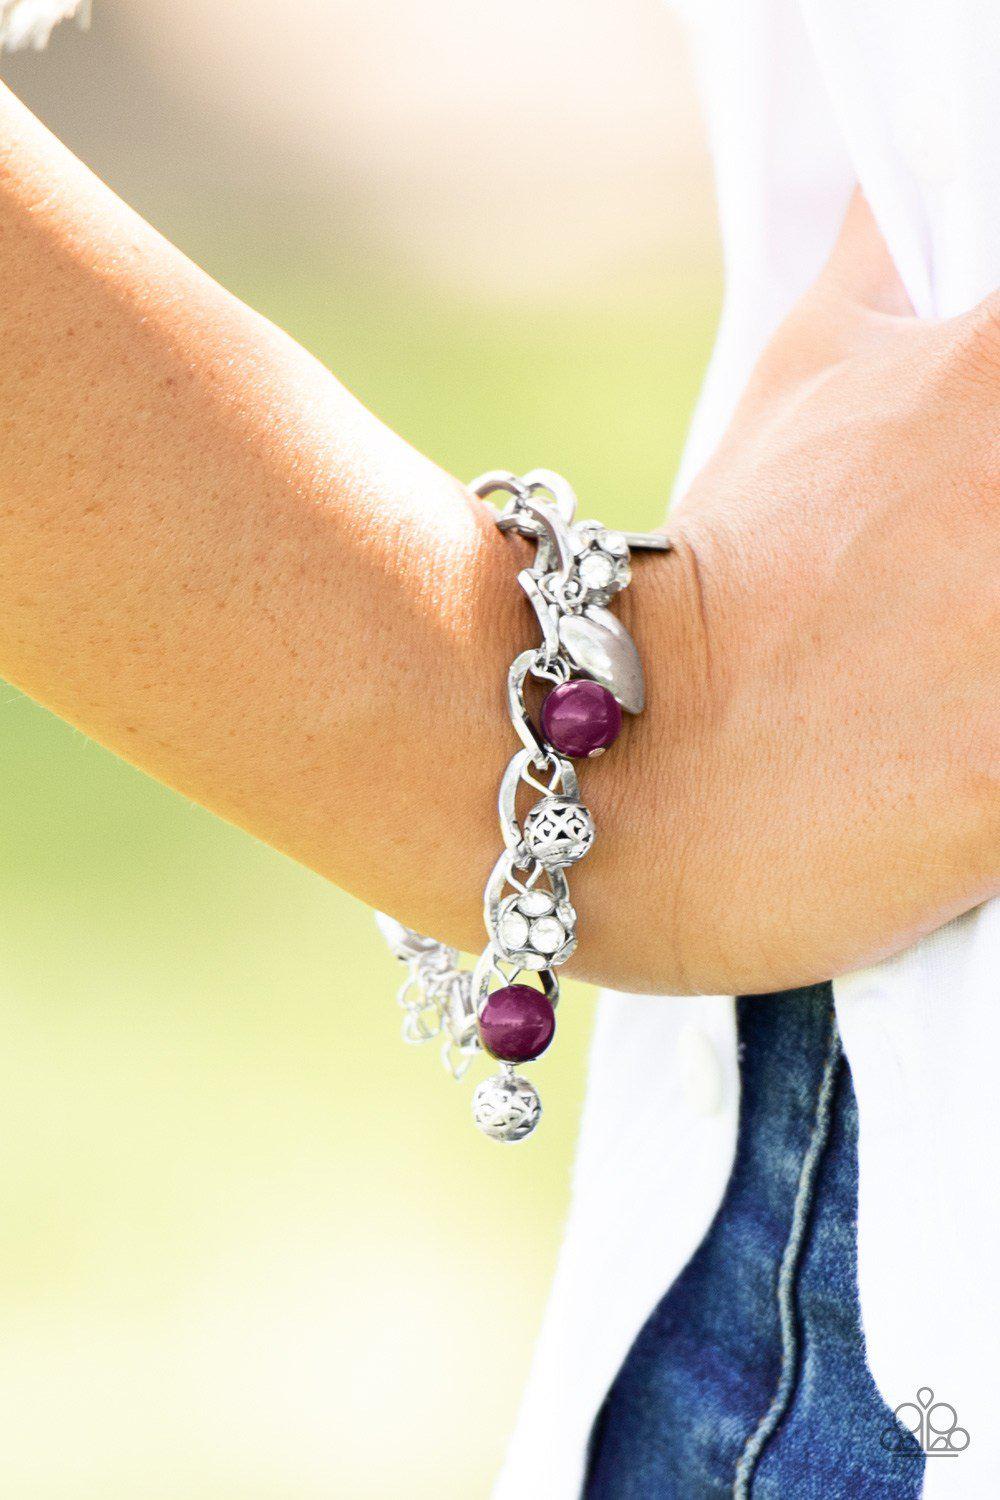 Royal Sweetheart Silver and Purple Charm Bracelet - Paparazzi Accessories-CarasShop.com - $5 Jewelry by Cara Jewels